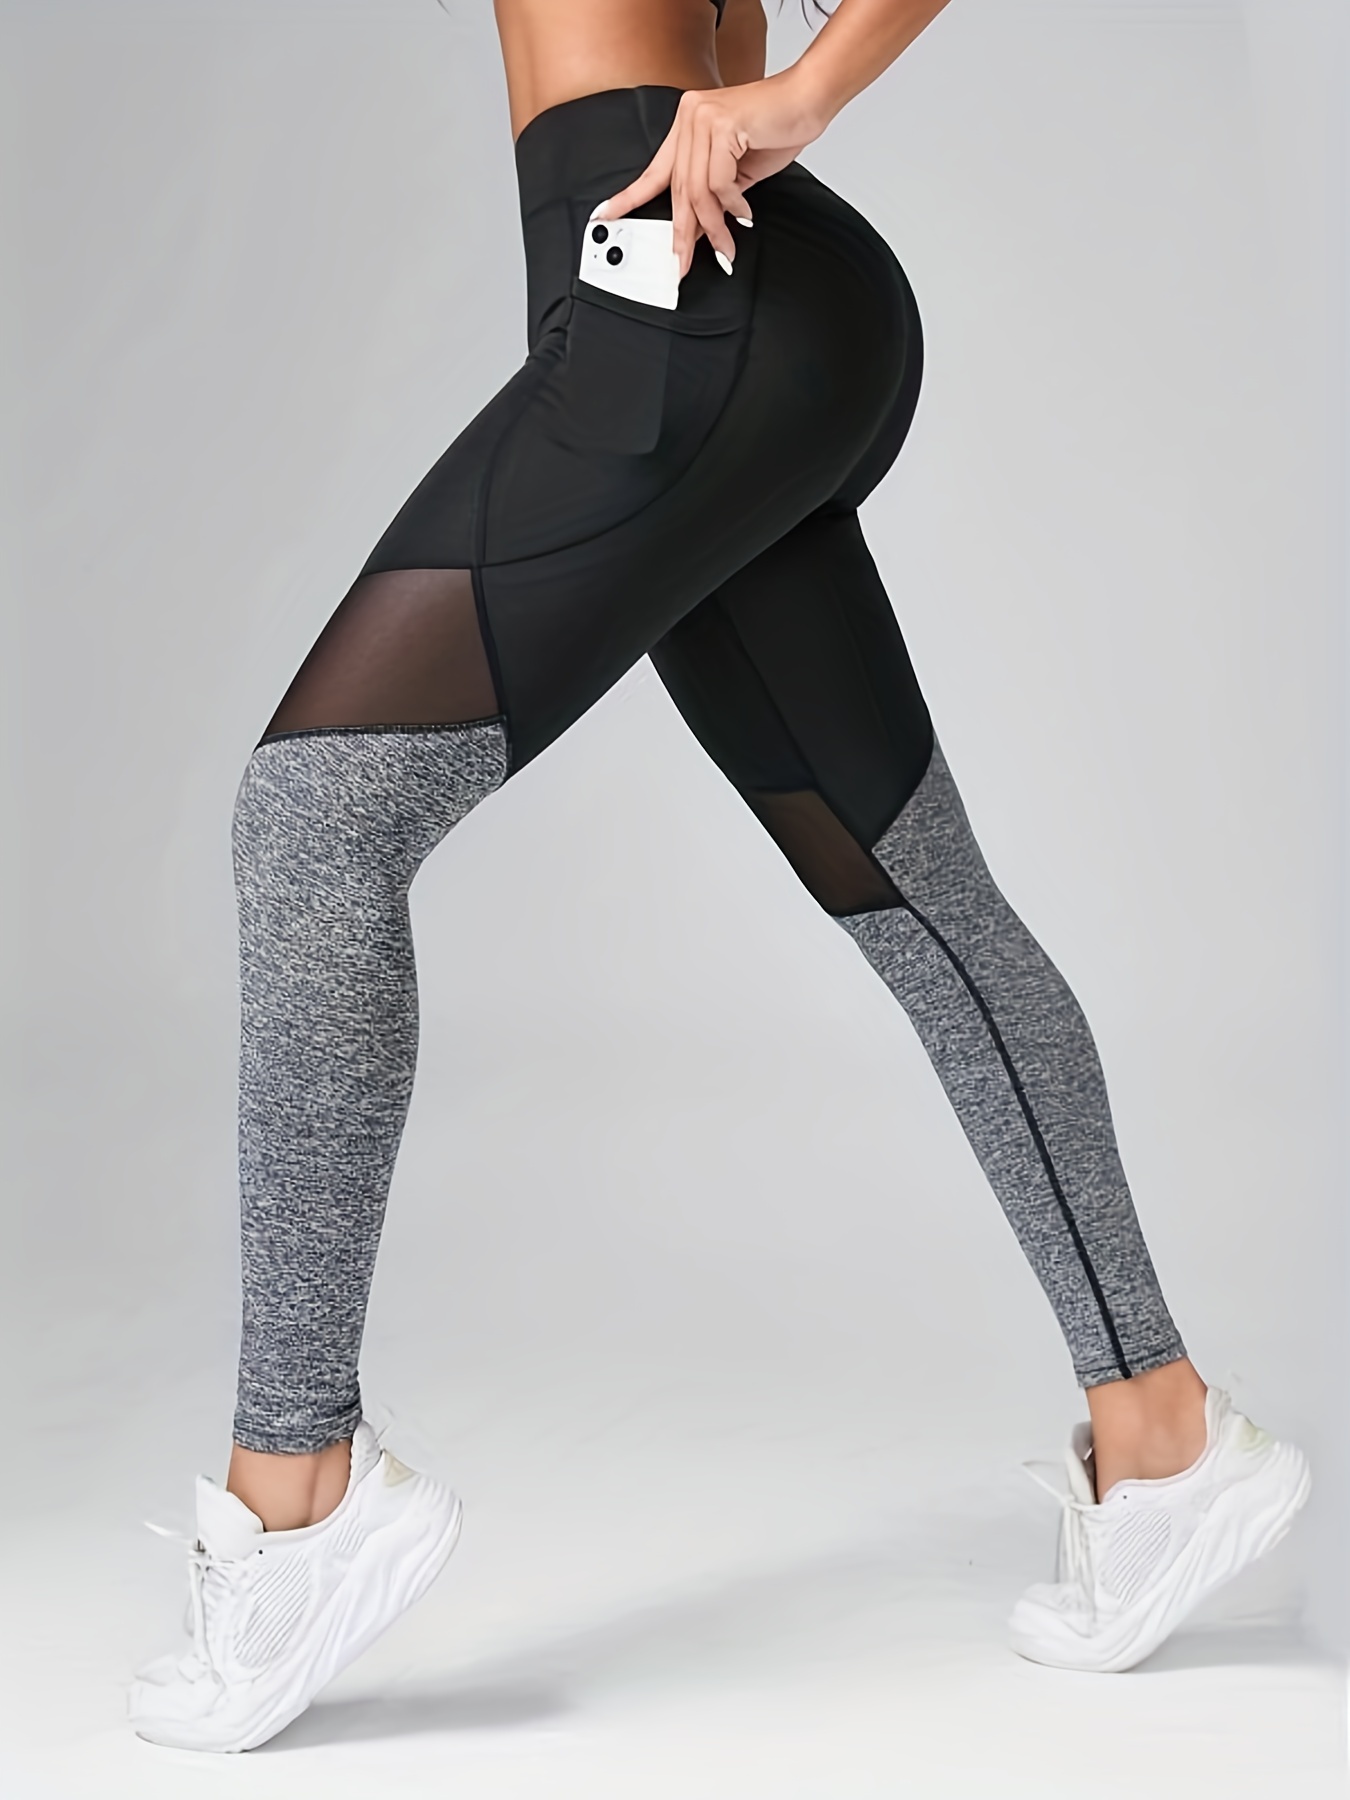 Stylish Criss Cross Workout Leggings with Breathable Mesh Panels